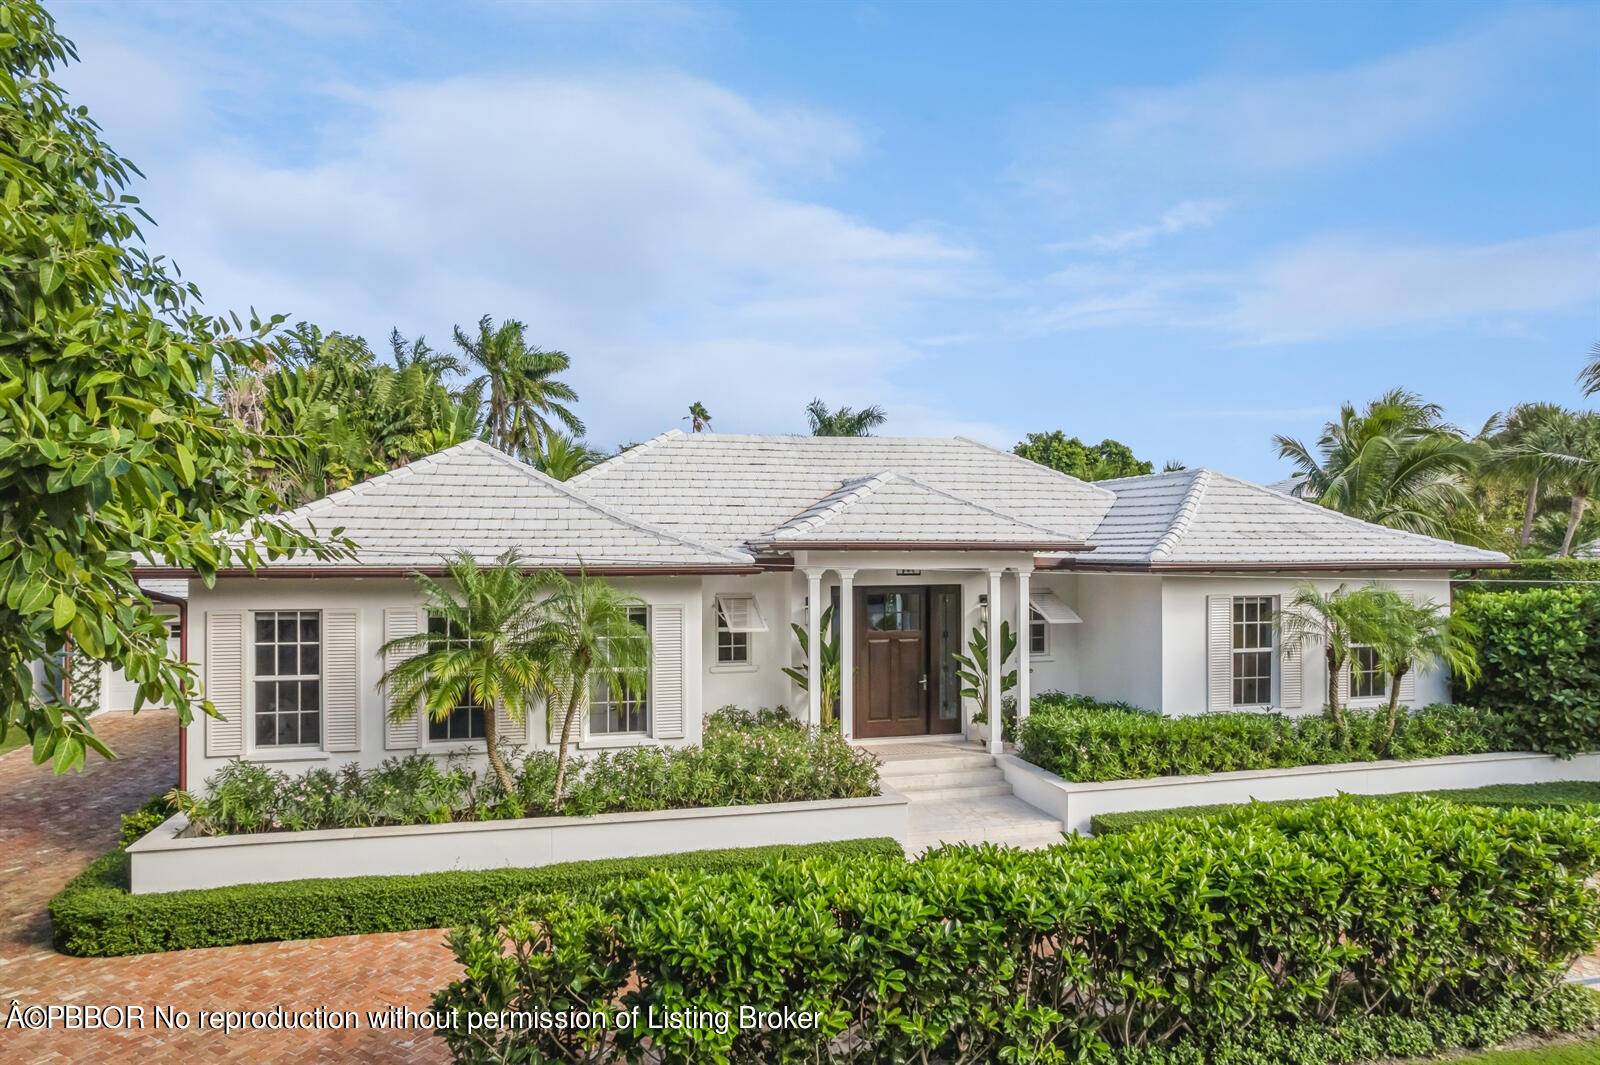 Experience luxurious living in the heart of Palm Beach with this exquisite 2022 construction, single story residence.